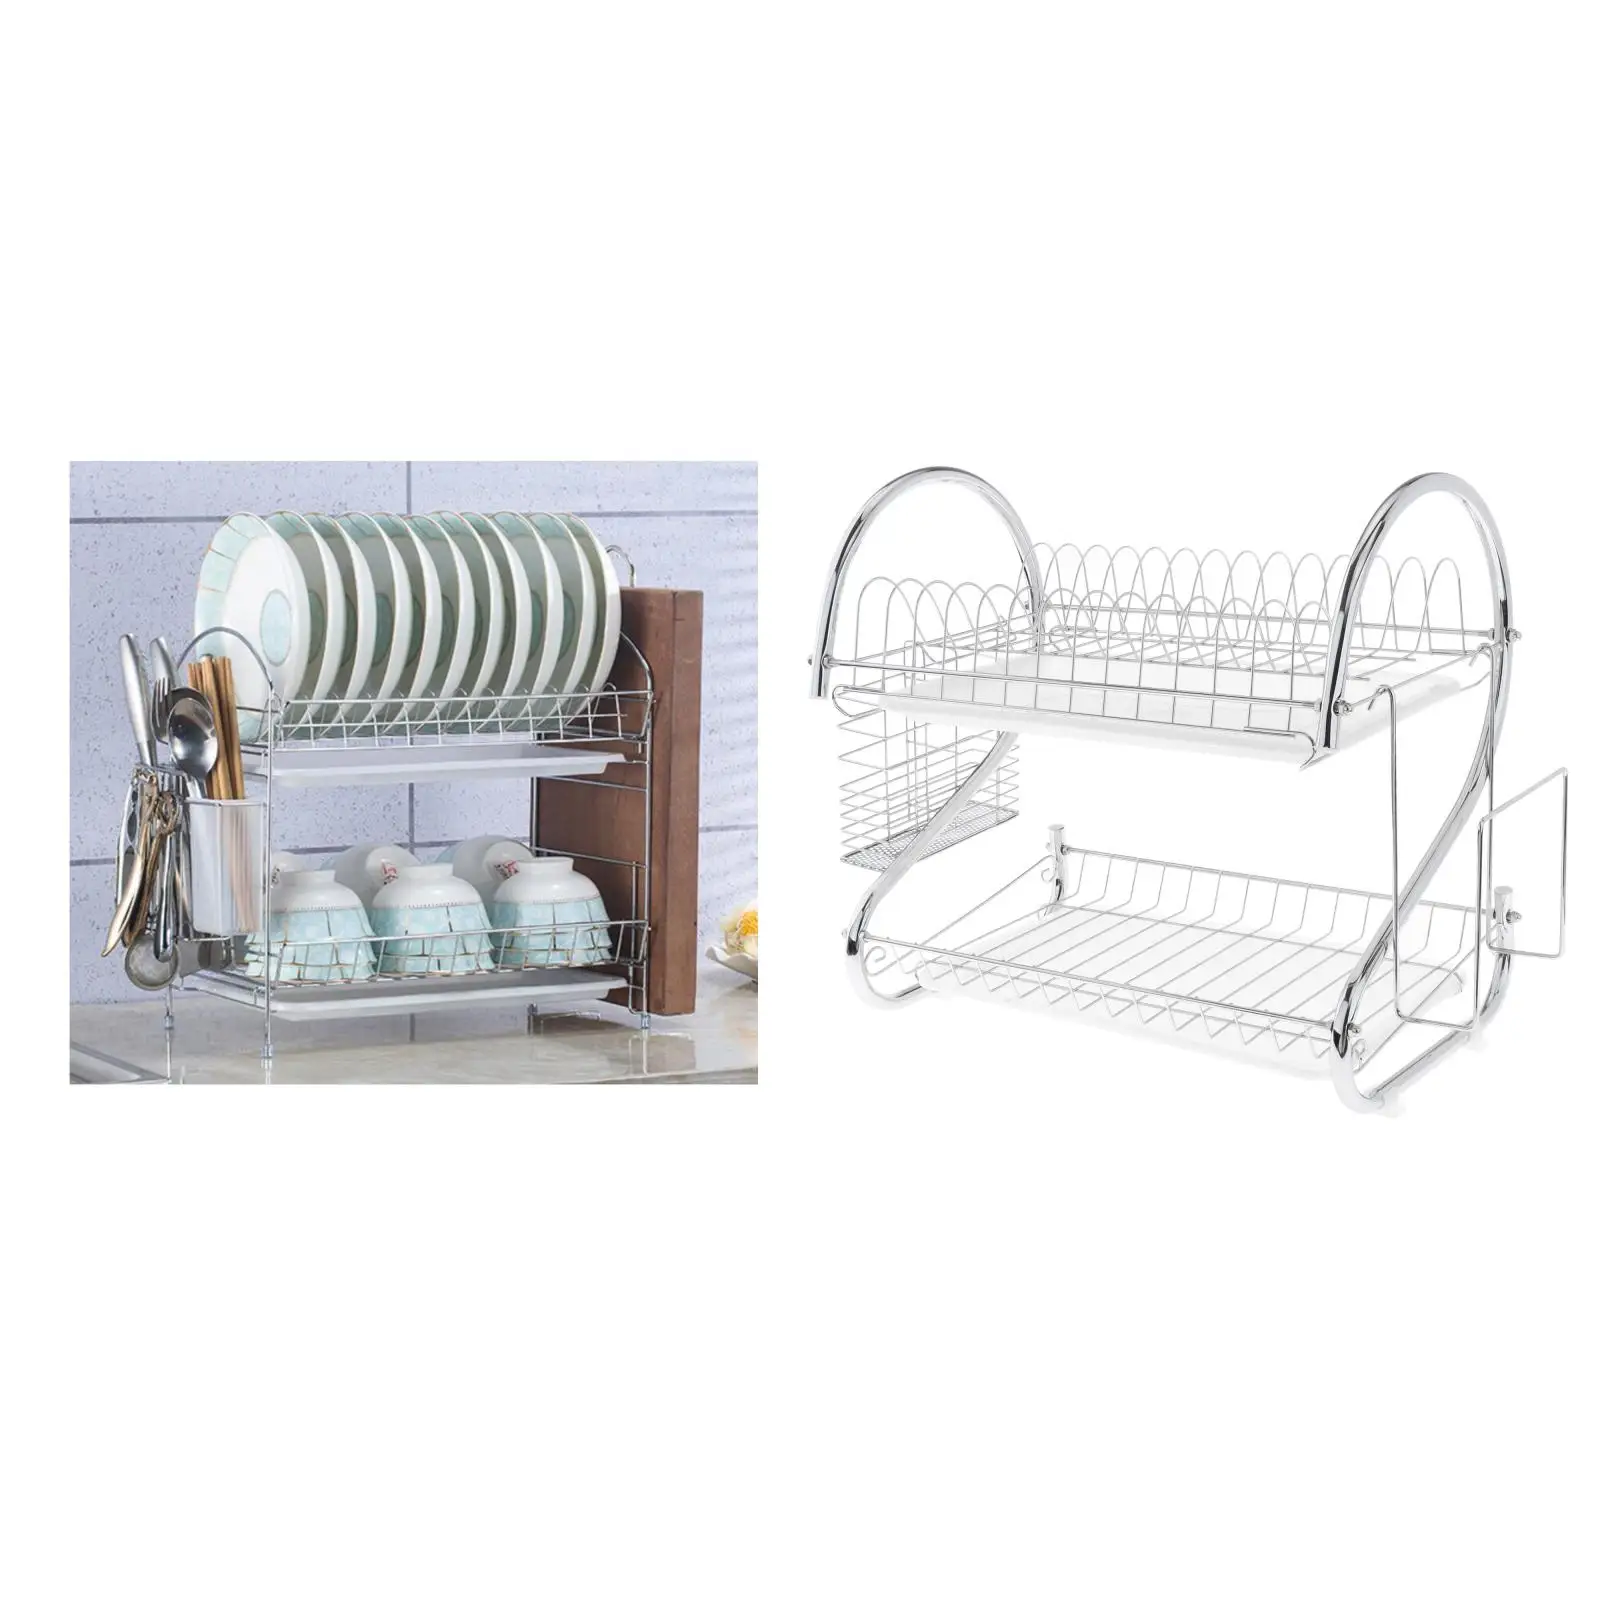 2-Tier Dish Drying Rack with Drainboard Drainer Kitchen Countertop Utensil Organizer Storage for Home